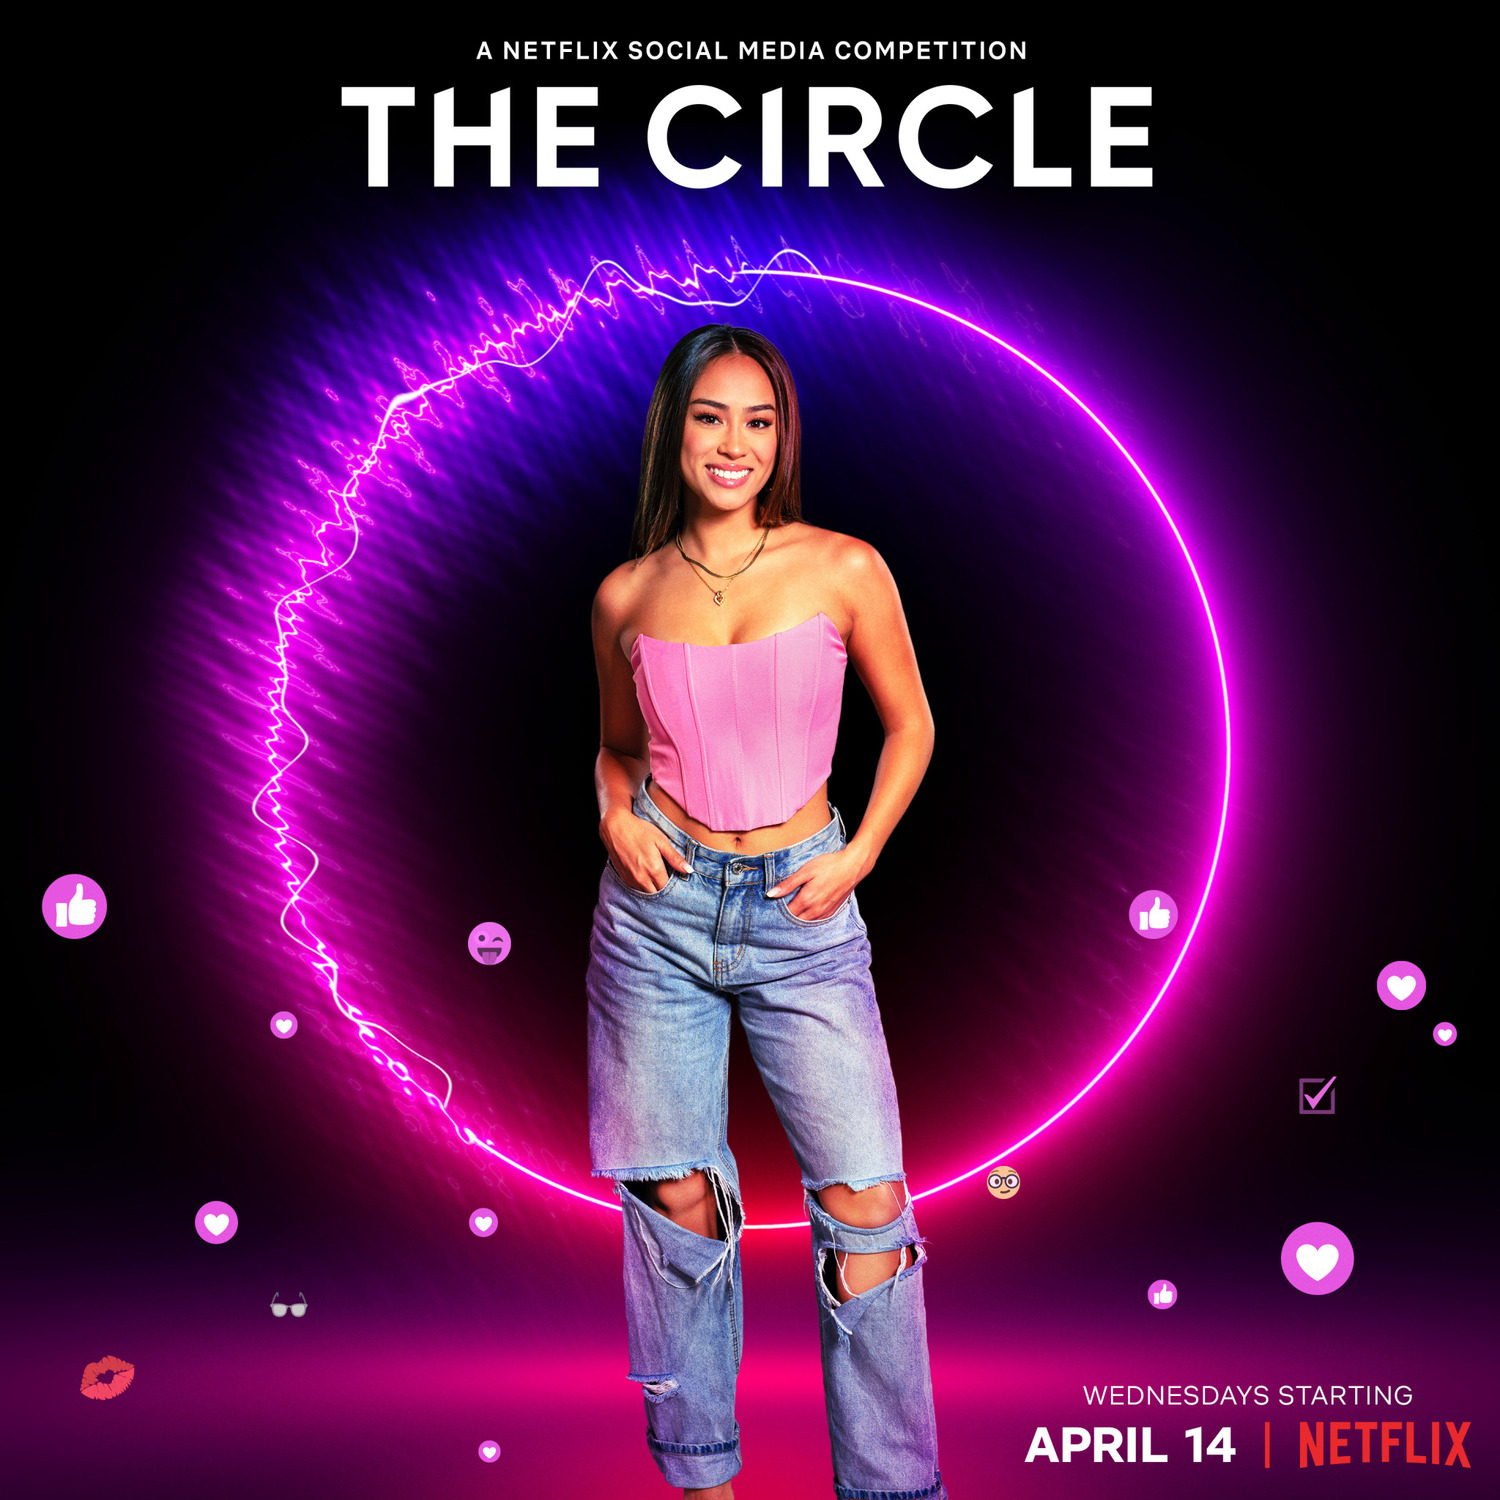 Extra Large TV Poster Image for The Circle (#5 of 20)